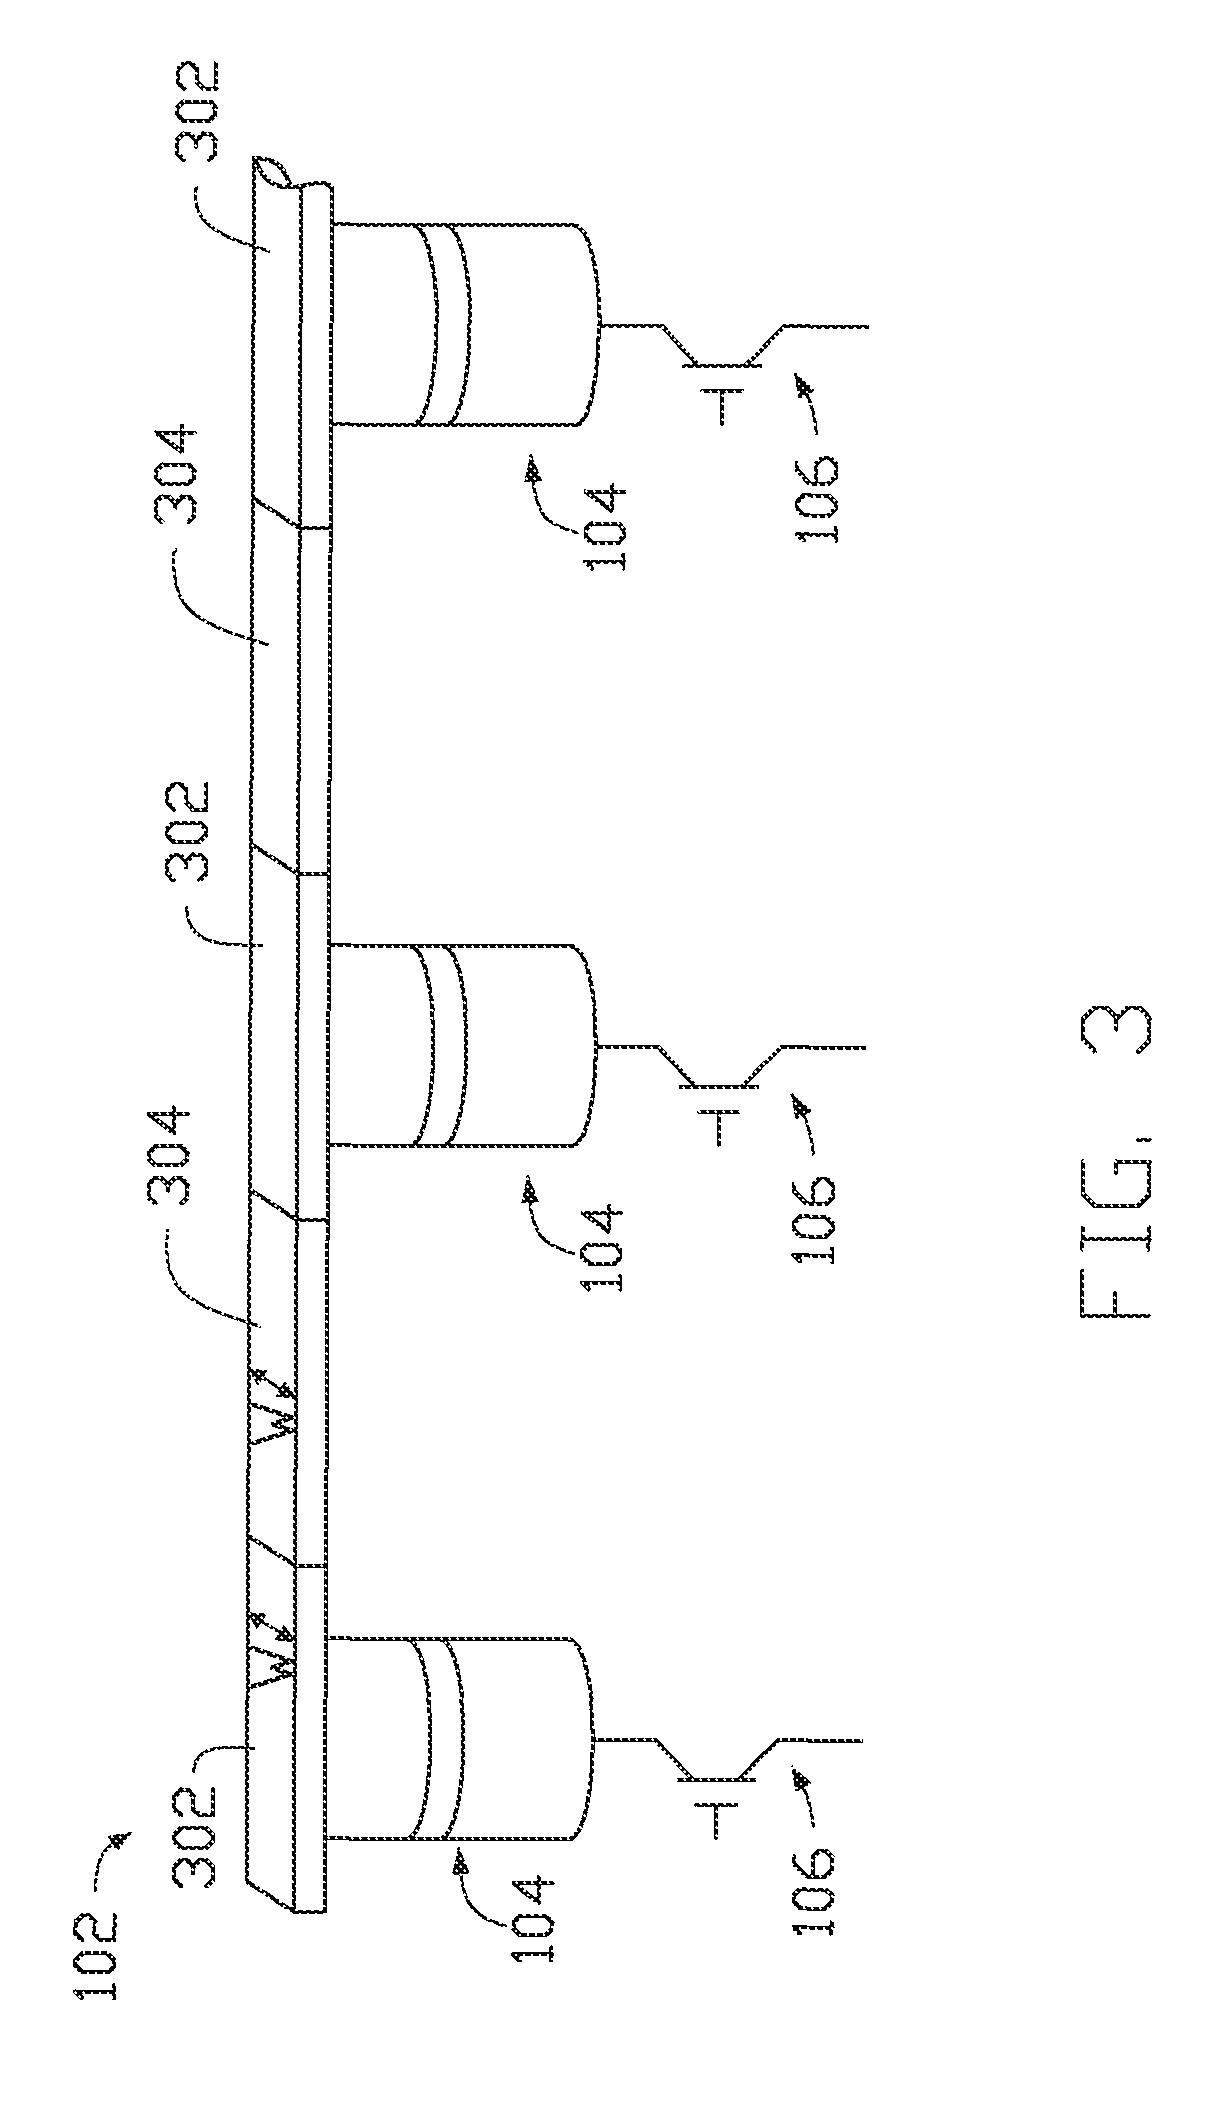 Bottom pinned SOT-MRAM bit structure and method of fabrication